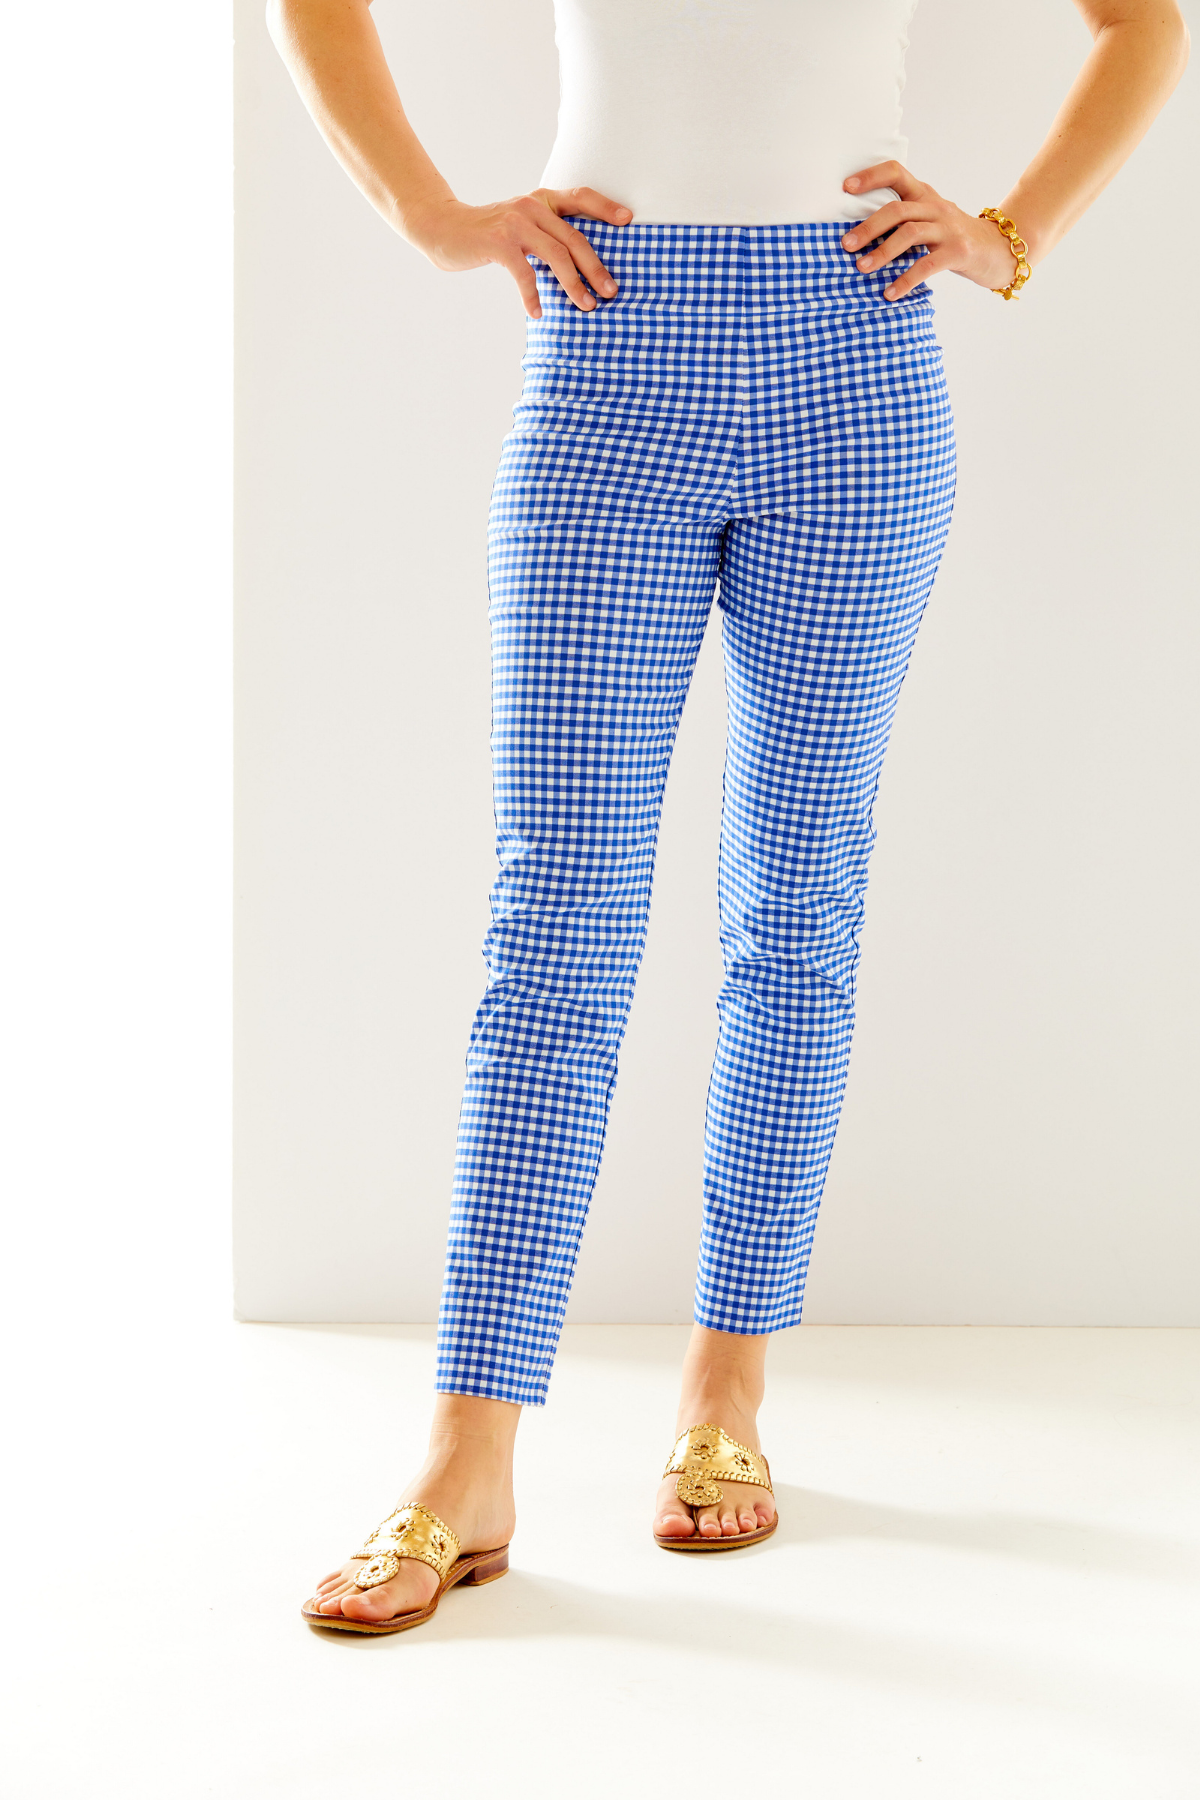 Woman in blue and white gingham pant